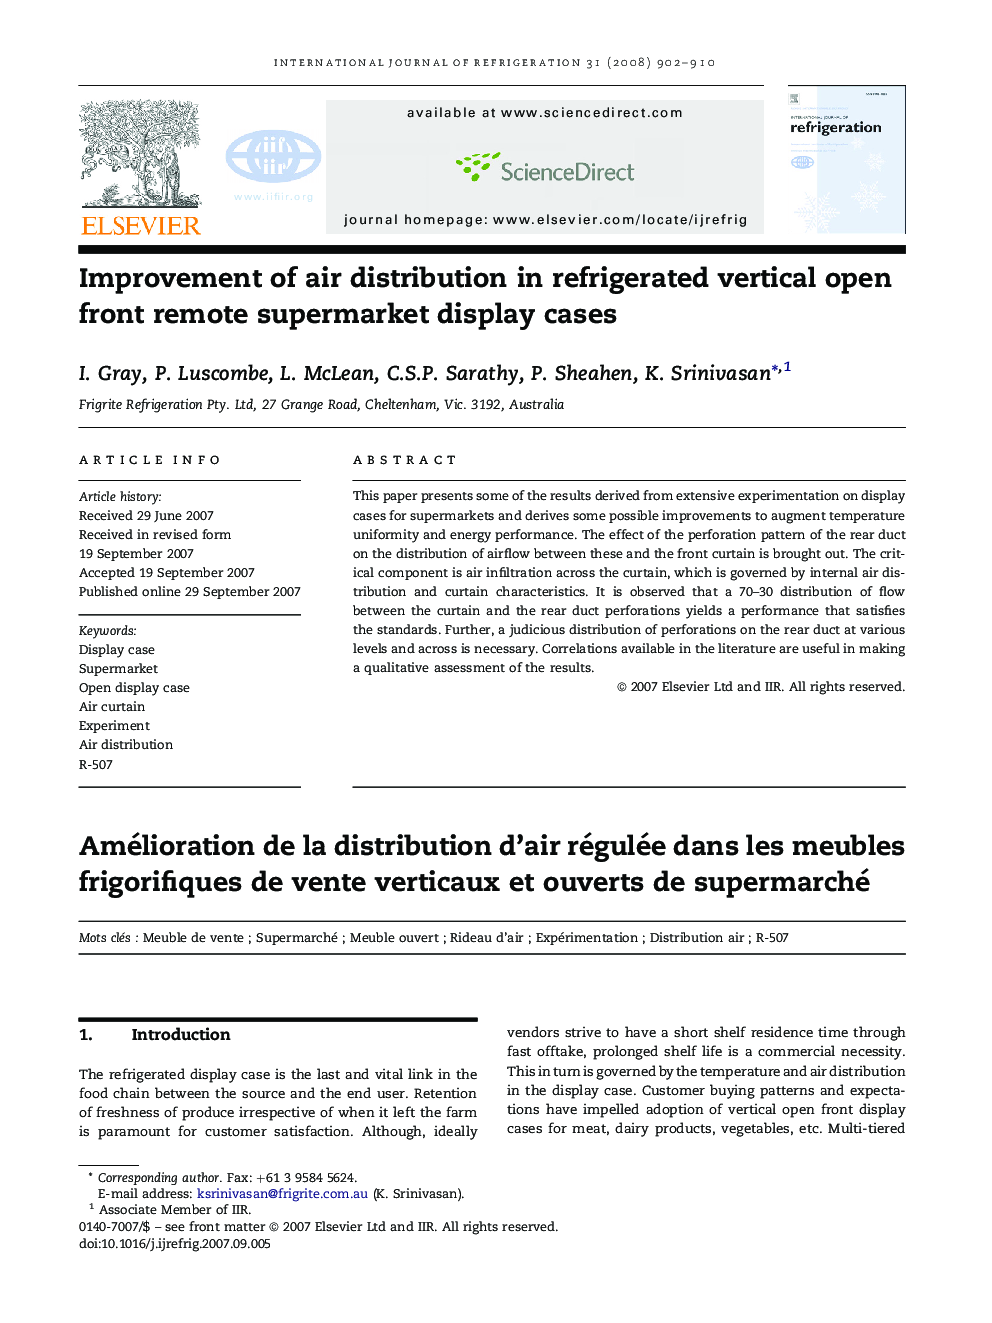 Improvement of air distribution in refrigerated vertical open front remote supermarket display cases